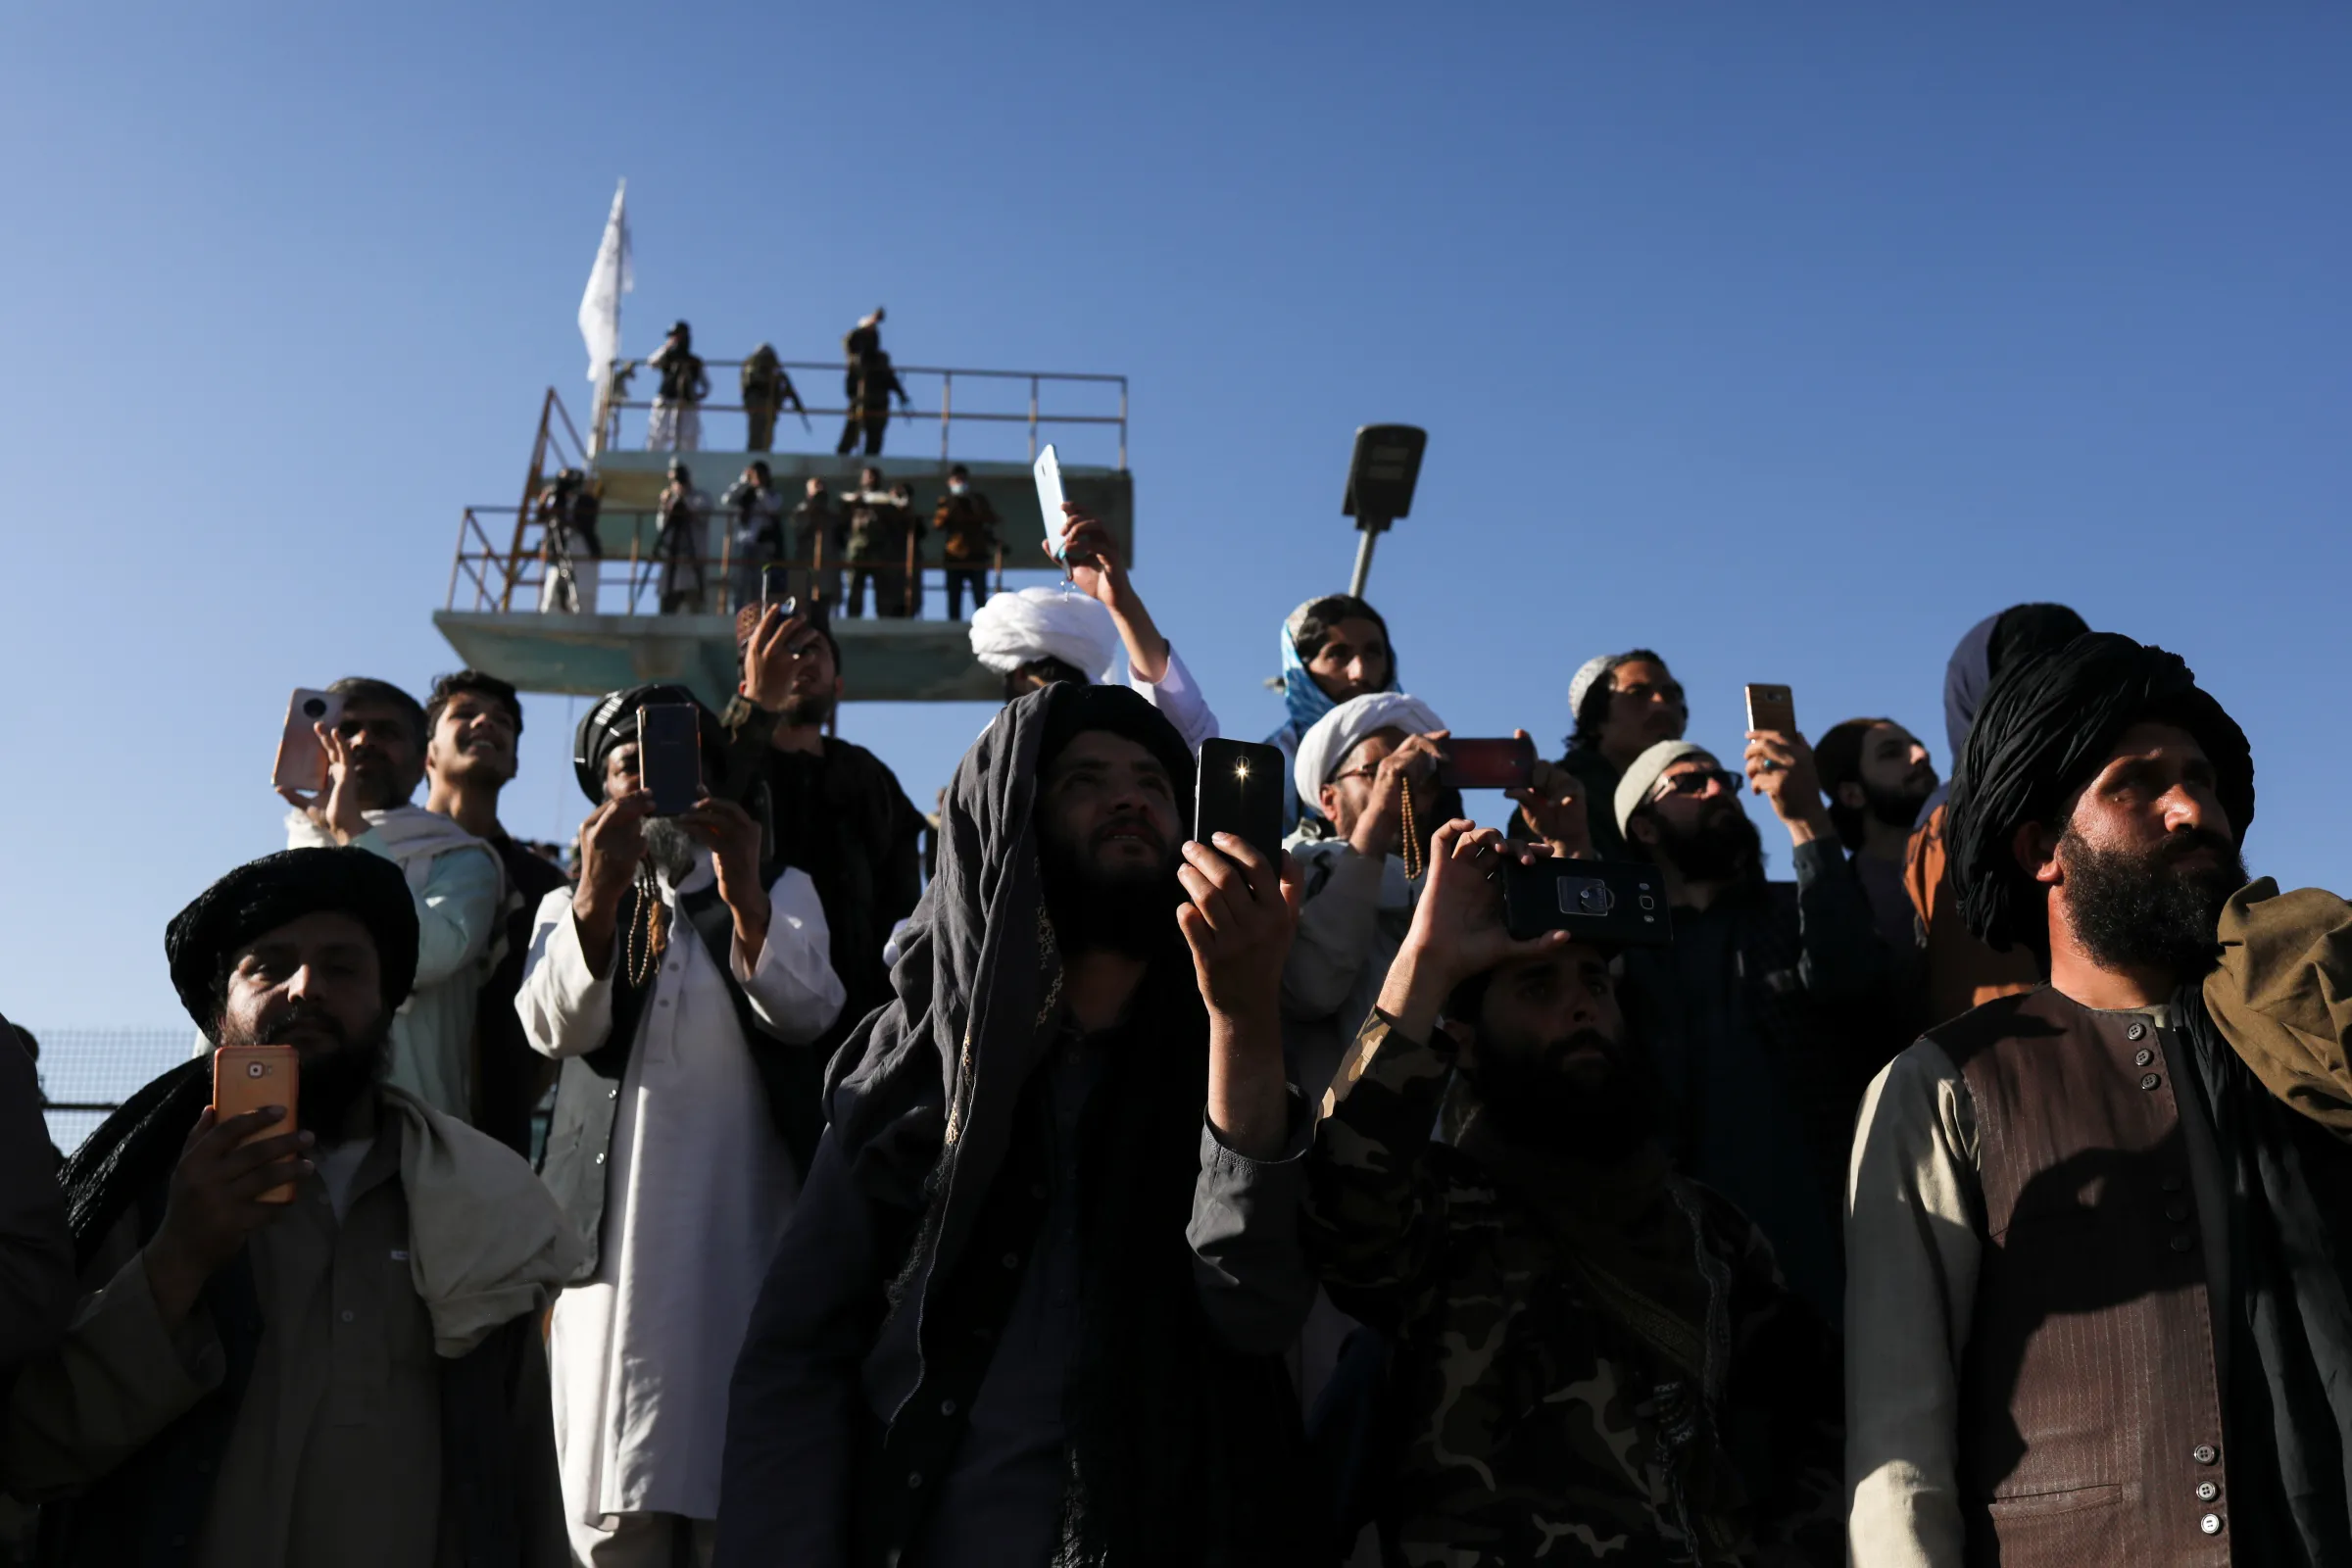 Taliban members take pictures with their mobile phones during the Taliban flag-raising ceremony in Kabul